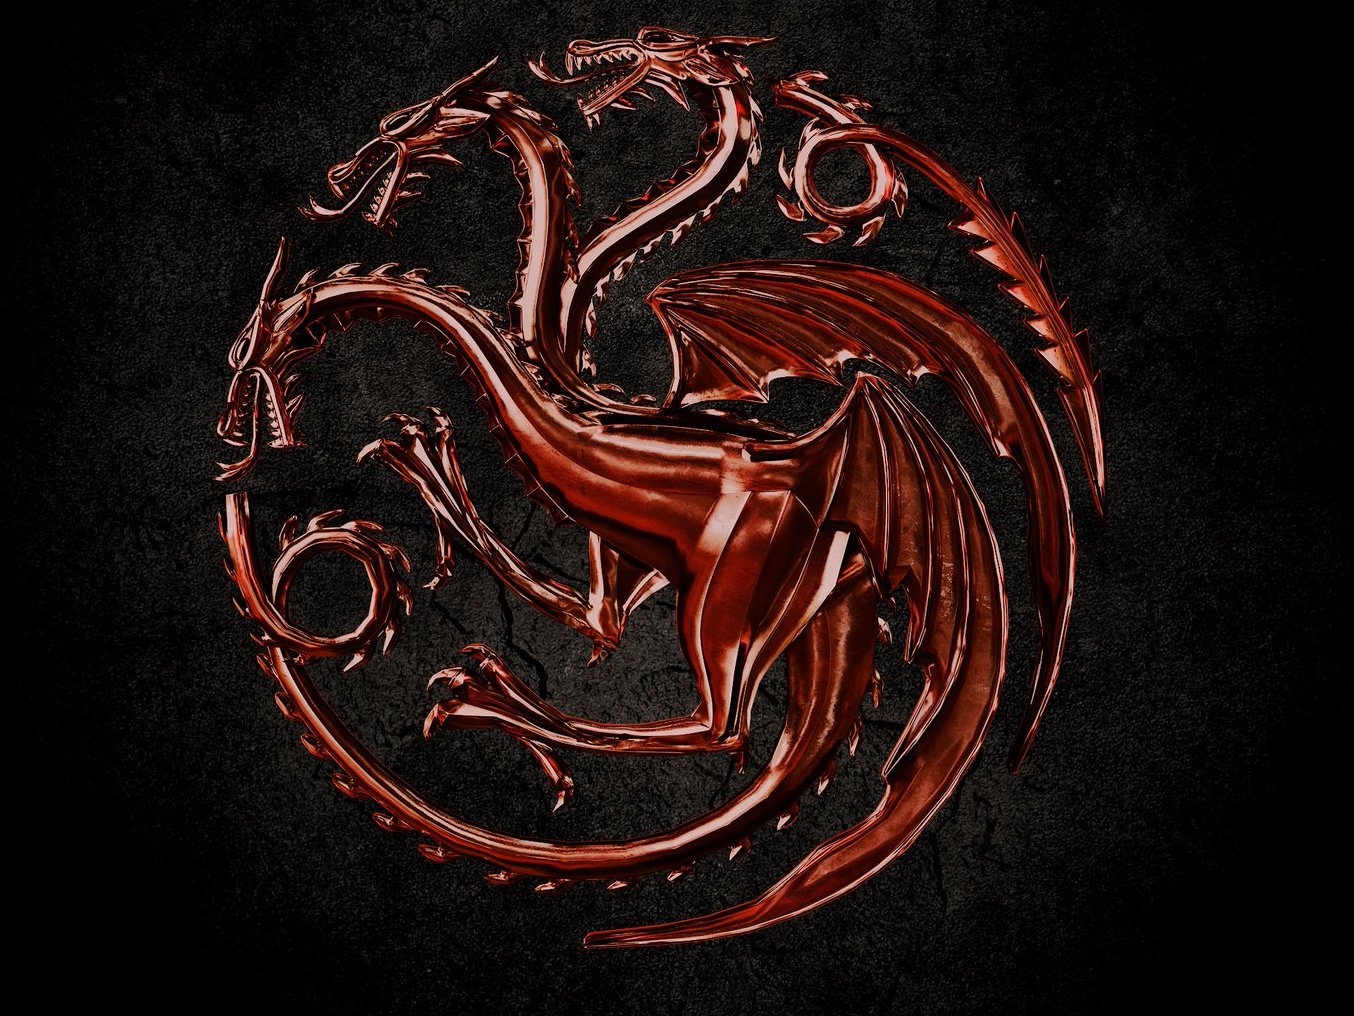 HBO announces 'House of the Dragon,' a prequel to 'Game of Thrones'